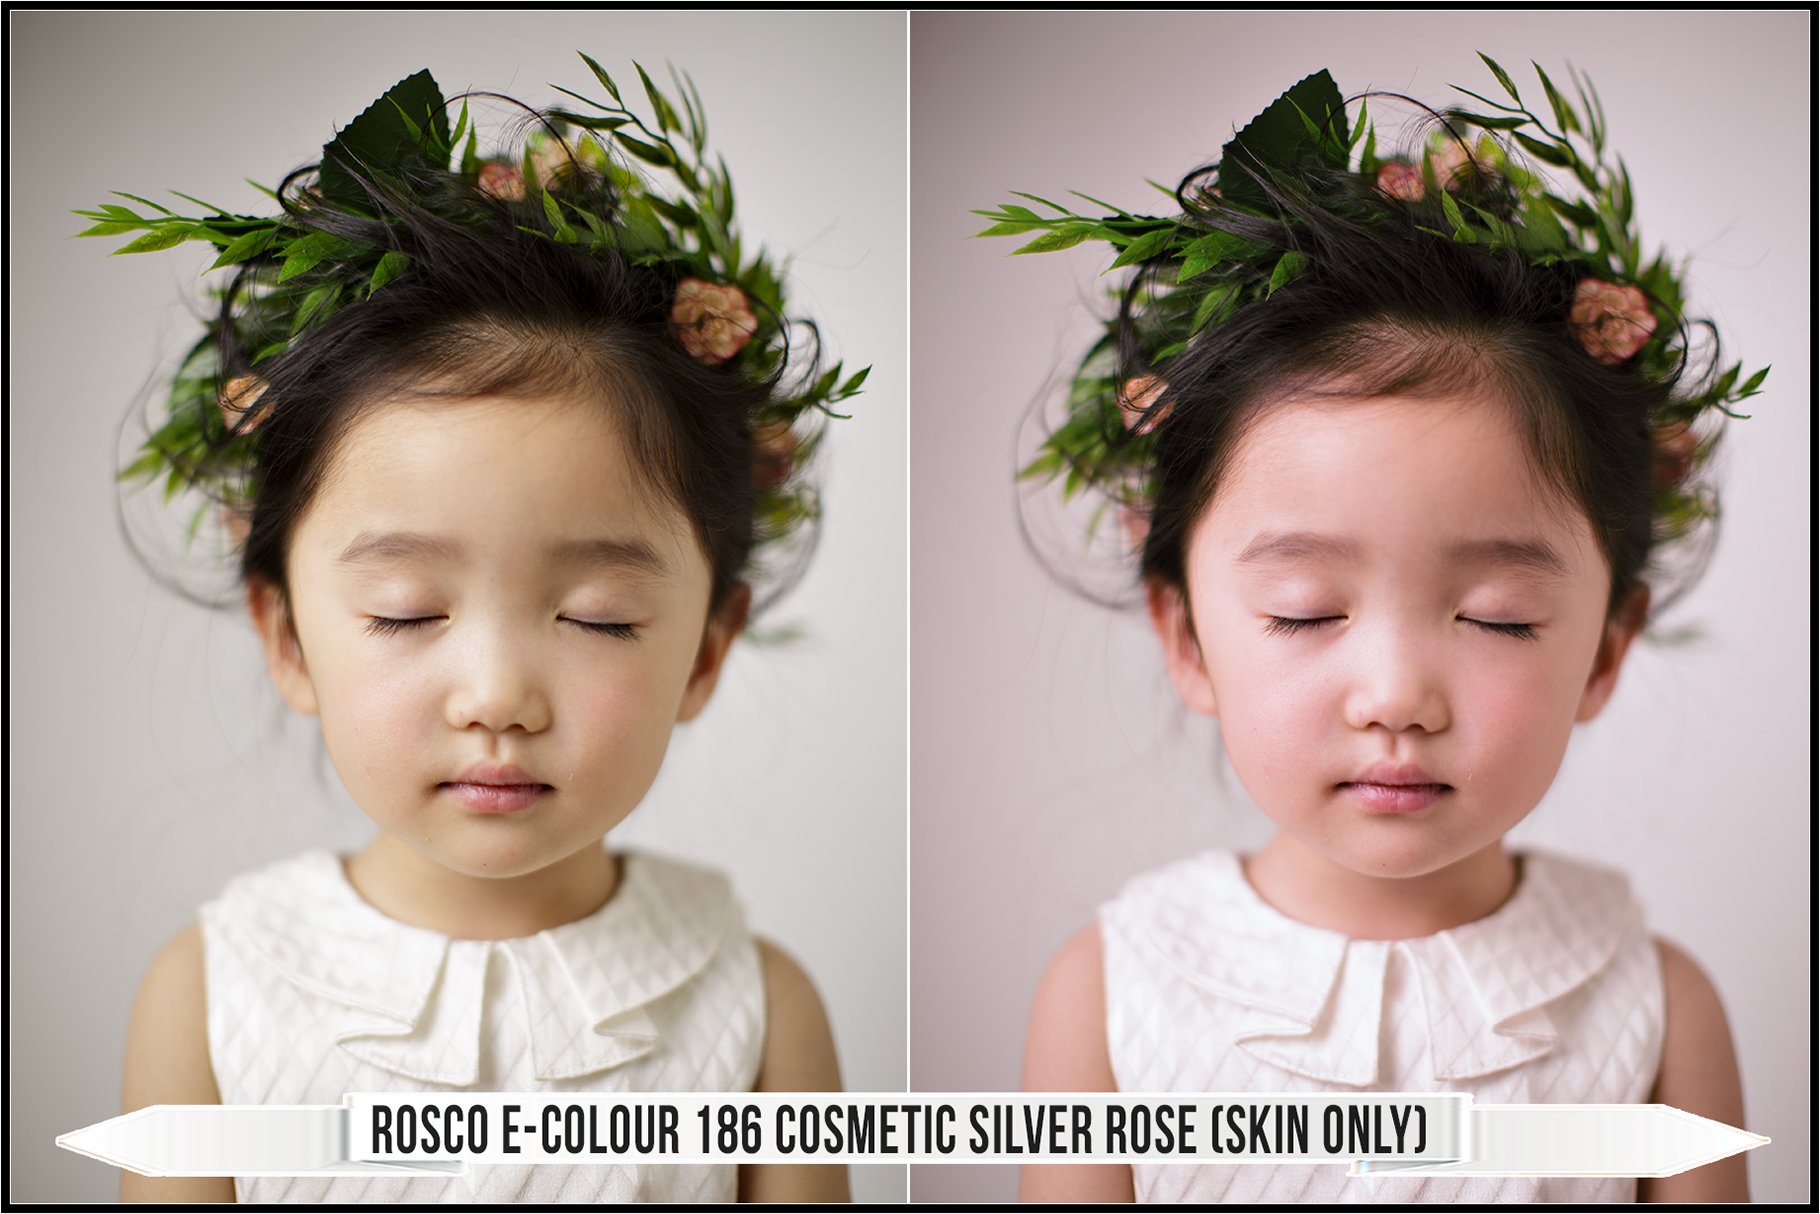 rosco e colour 186 cosmetic silver rose 28skin only29 676